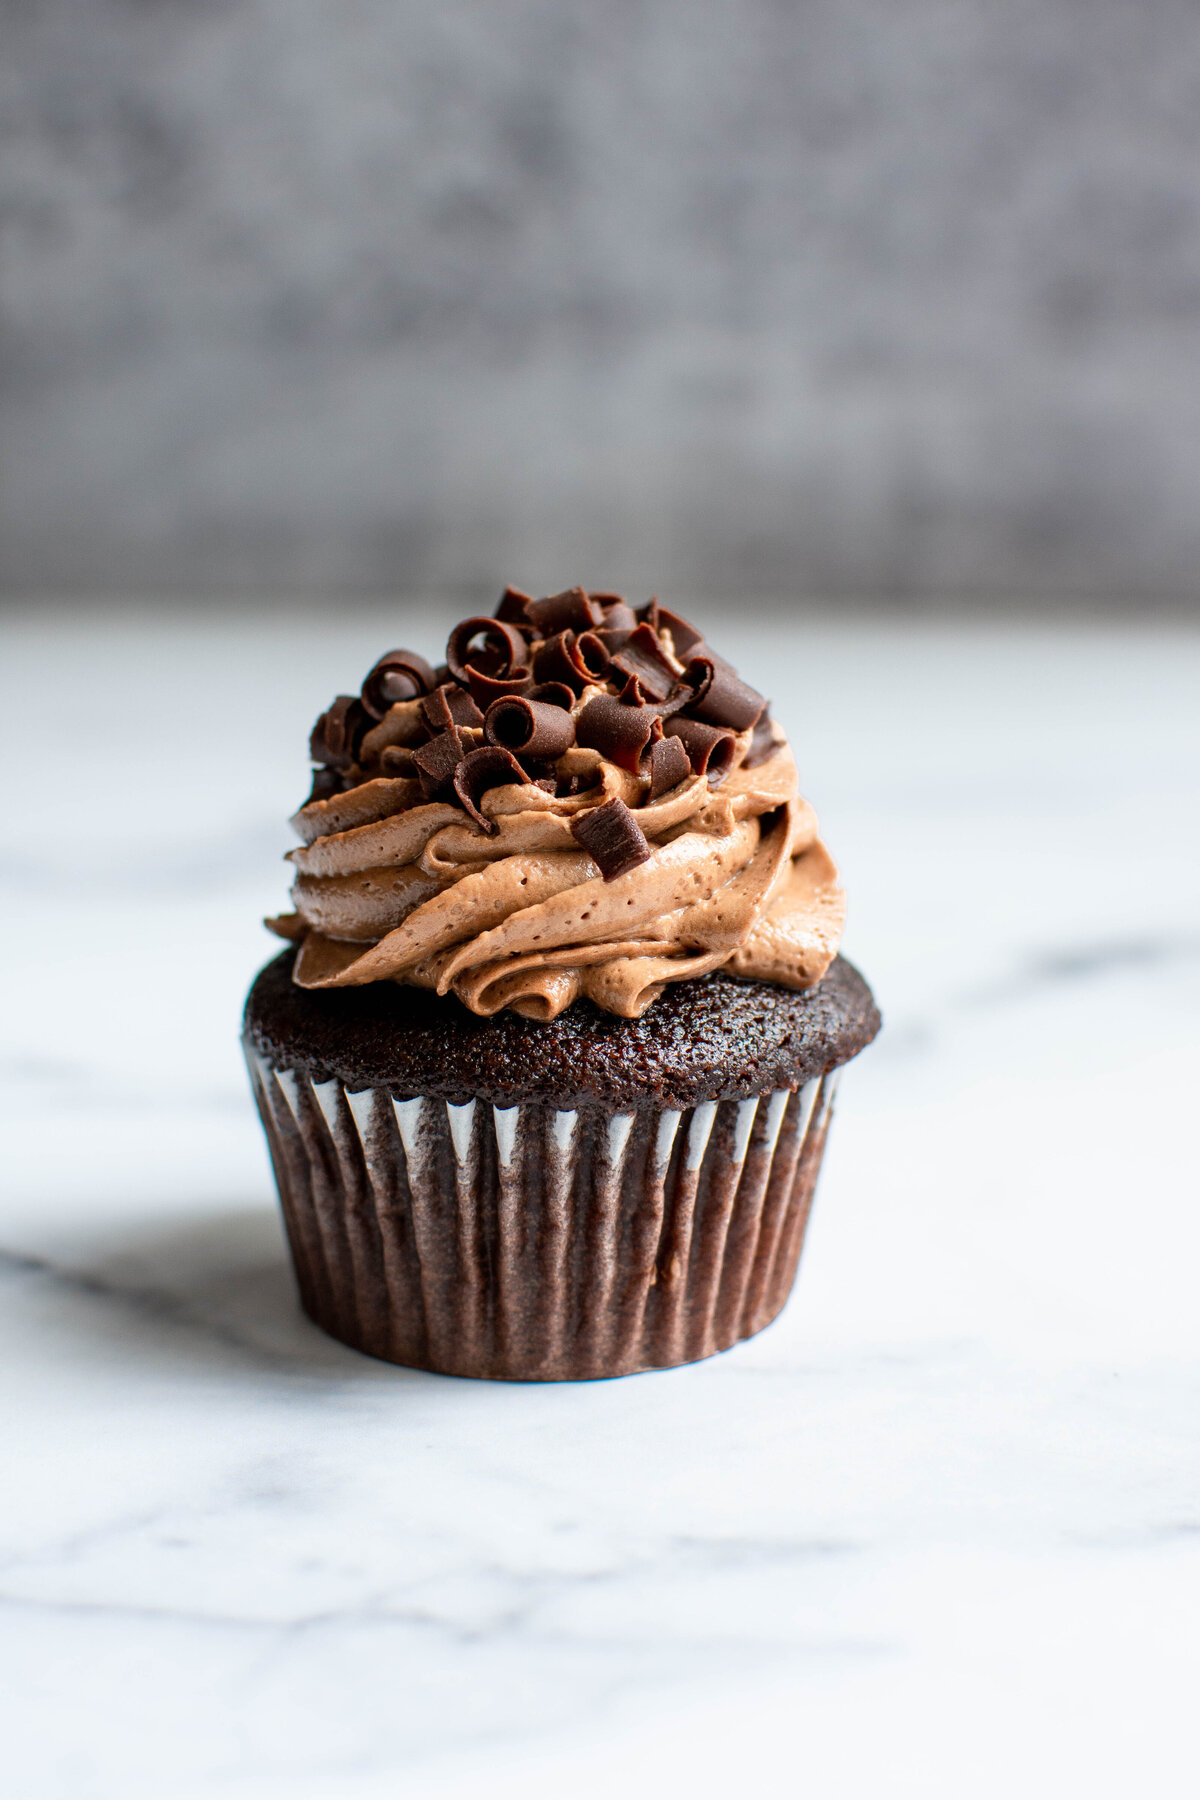 Chocolate cupcake with chocolate frosting and curled chocolate shavings on a light marble surface